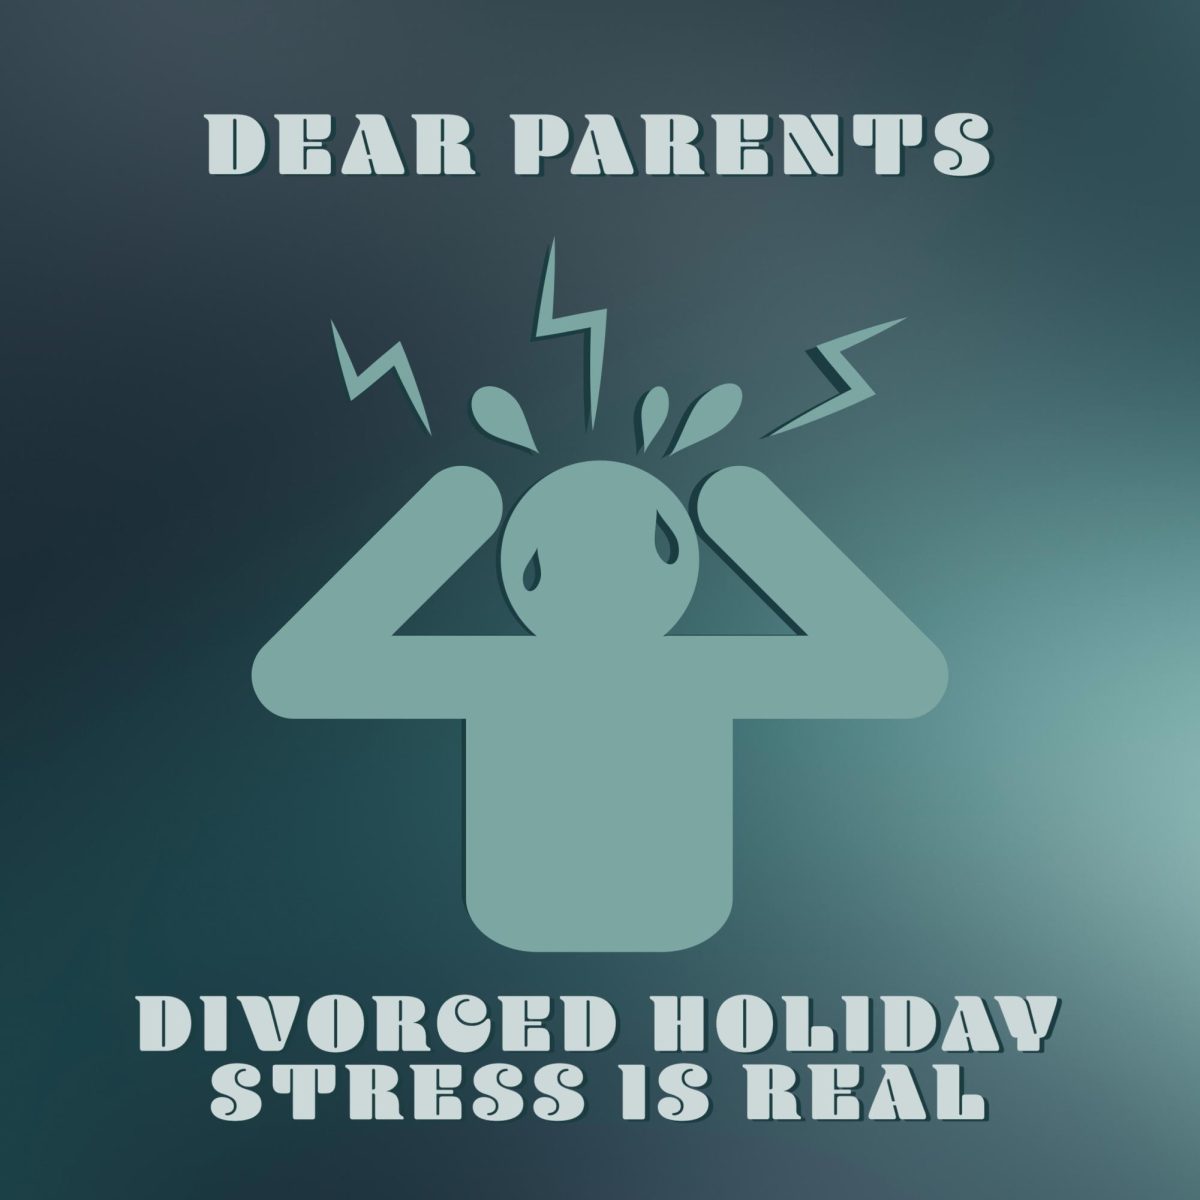 Dear parents: Divorced holiday stress is real